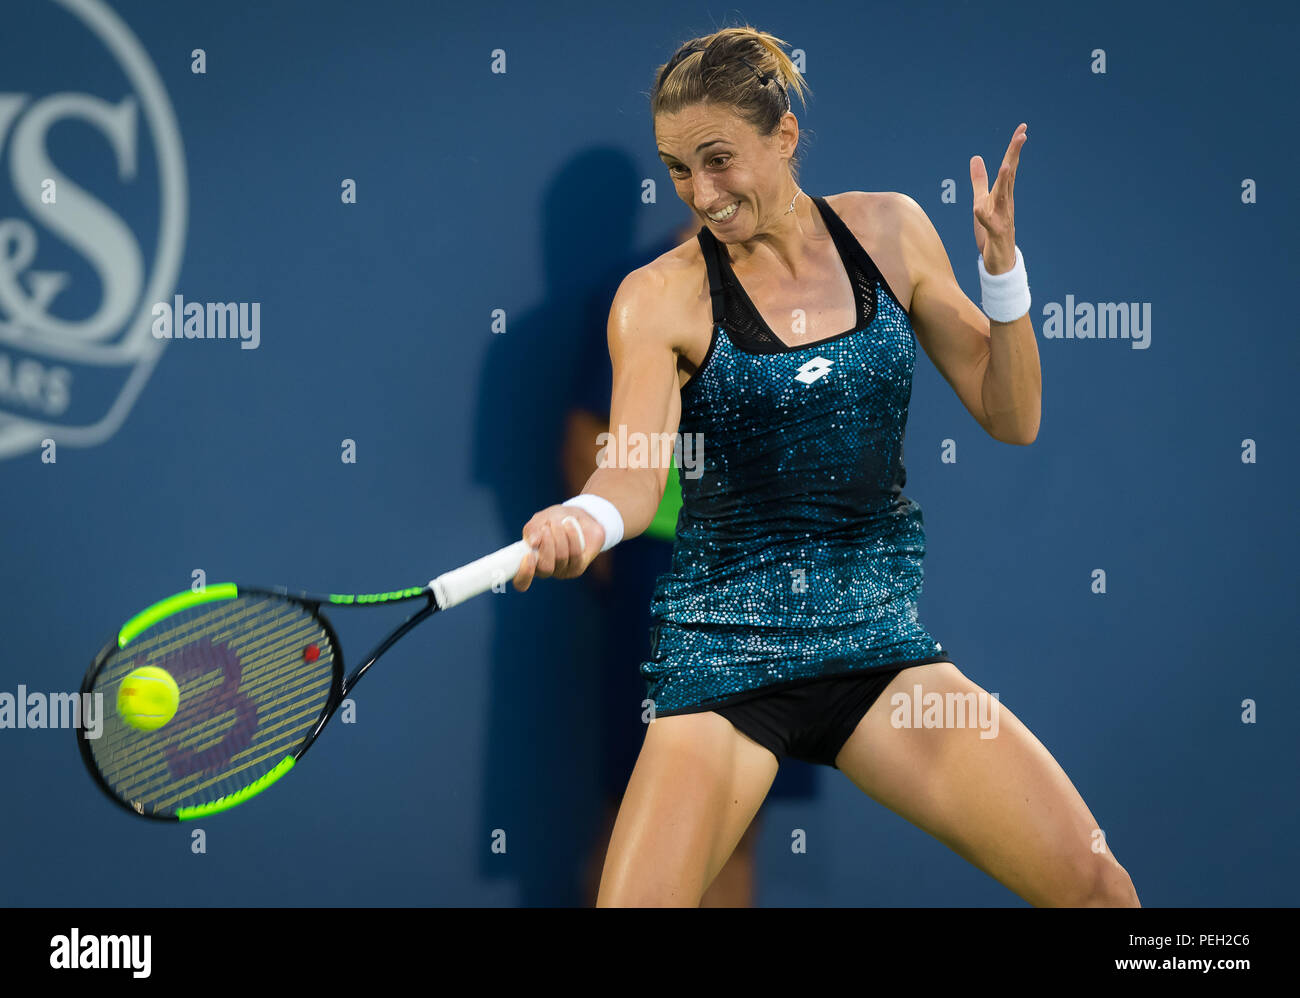 Cincinnati, OH, USA. August 14, 2018 - Petra Martic of Croatia in action  during her first-round match at the 2018 Western & Southern Open WTA  Premier 5 tennis tournament. Cincinnati, Ohio, USA.